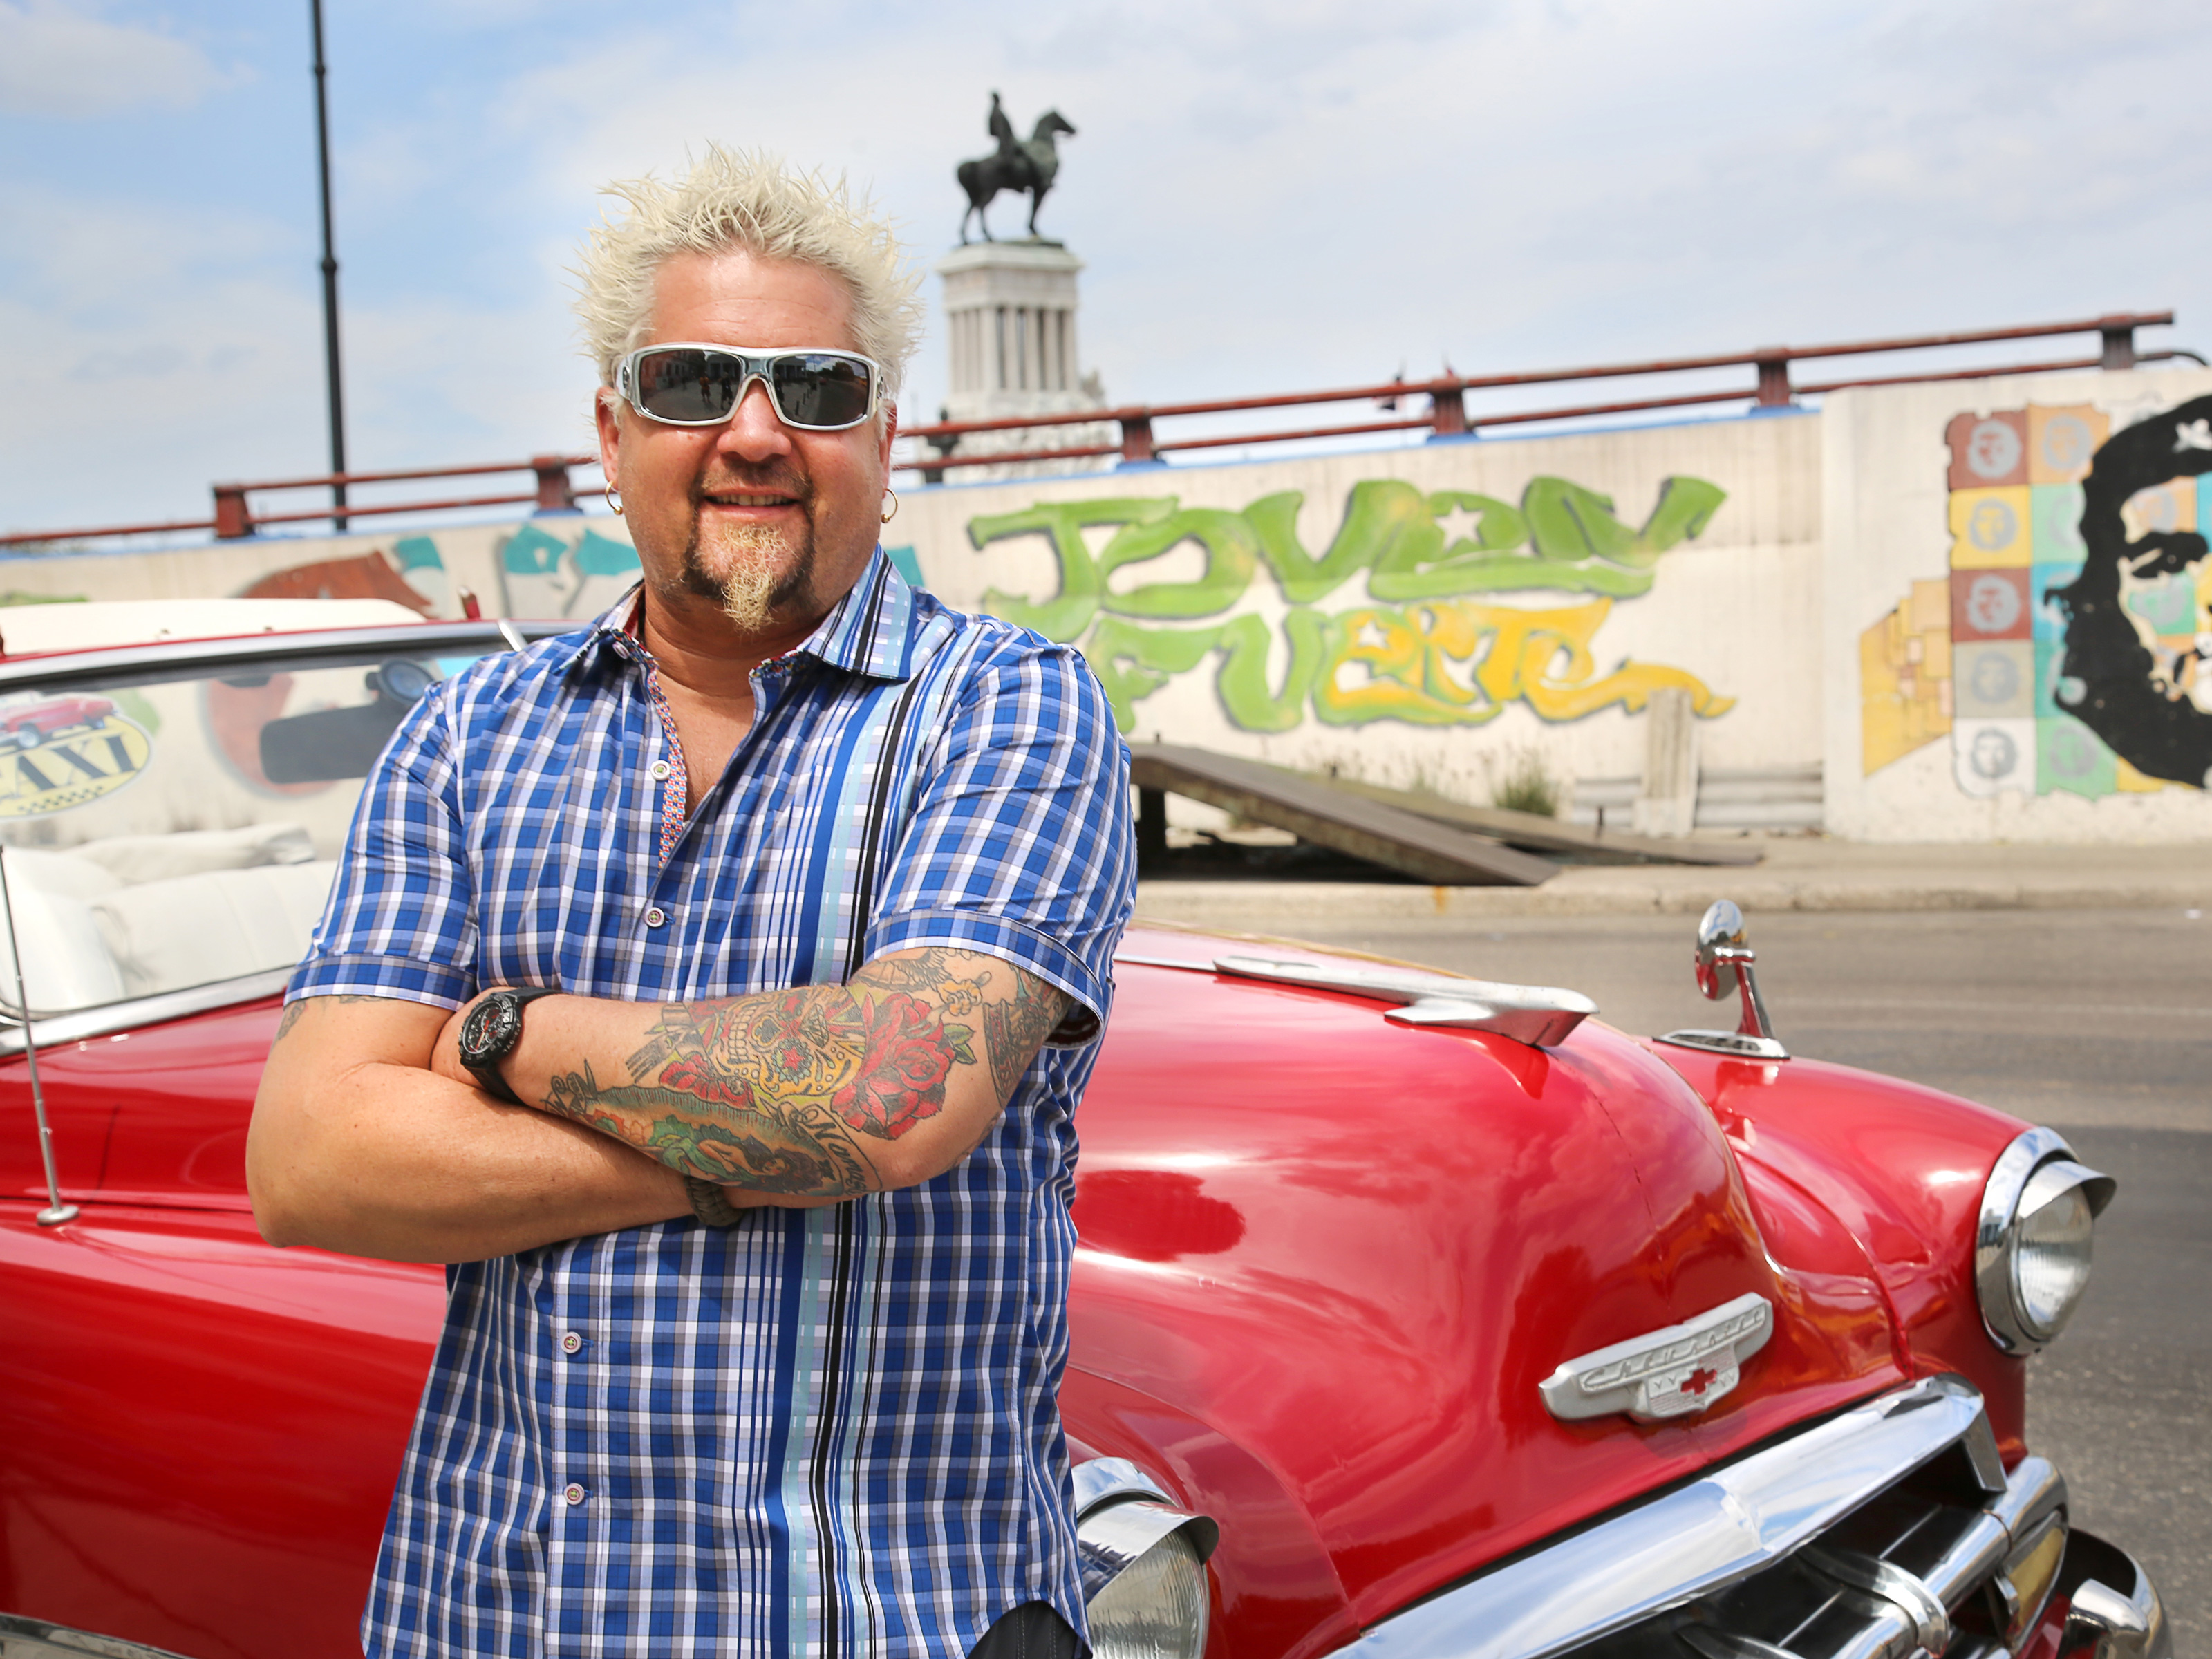 diners drive ins and dives nashville